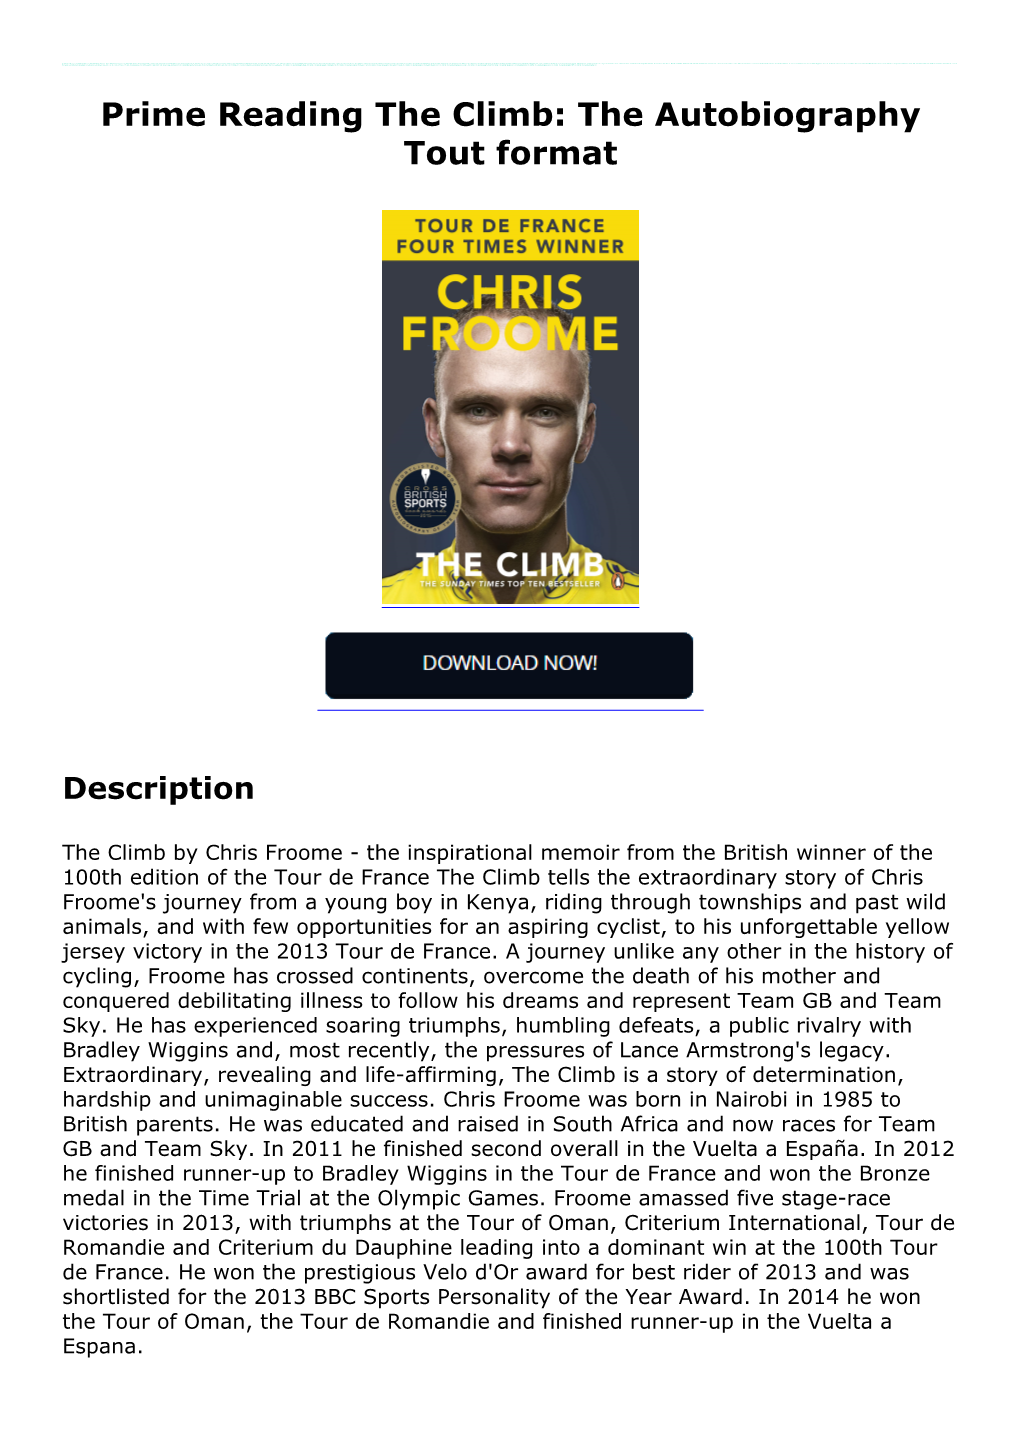 Prime Reading the Climb: the Autobiography Tout Format